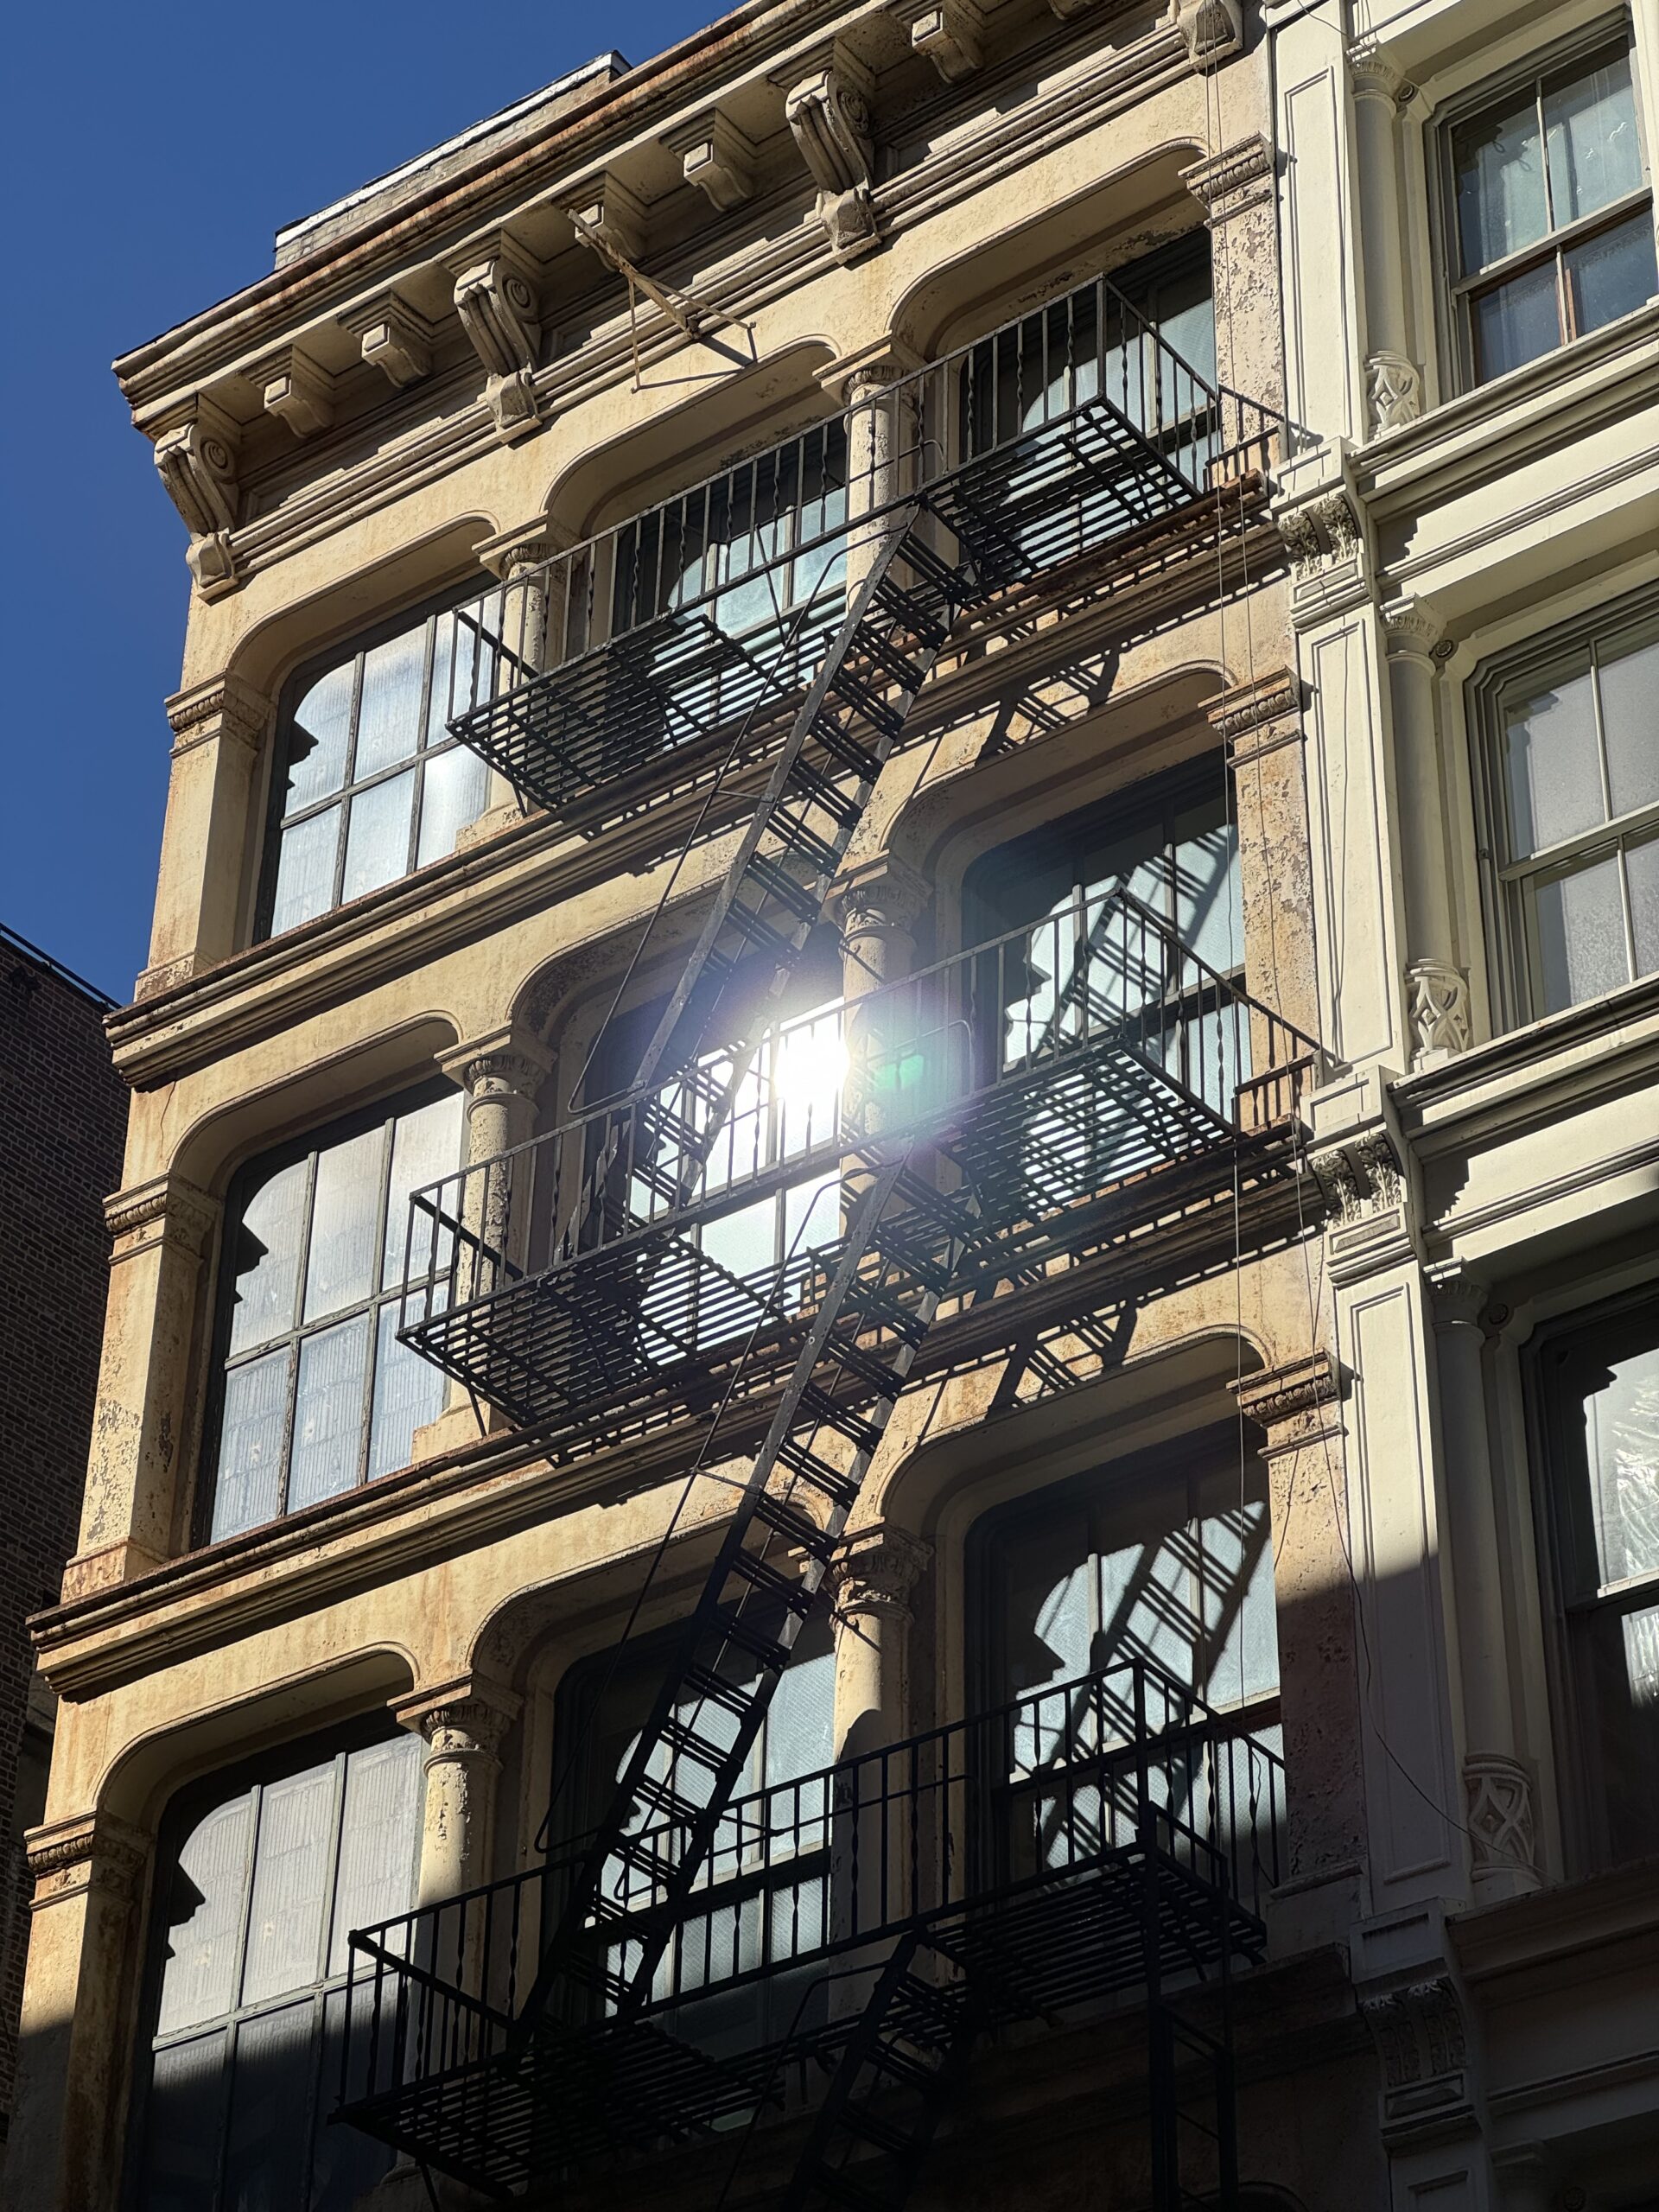 A SoHo building with large windows and a fire escape.